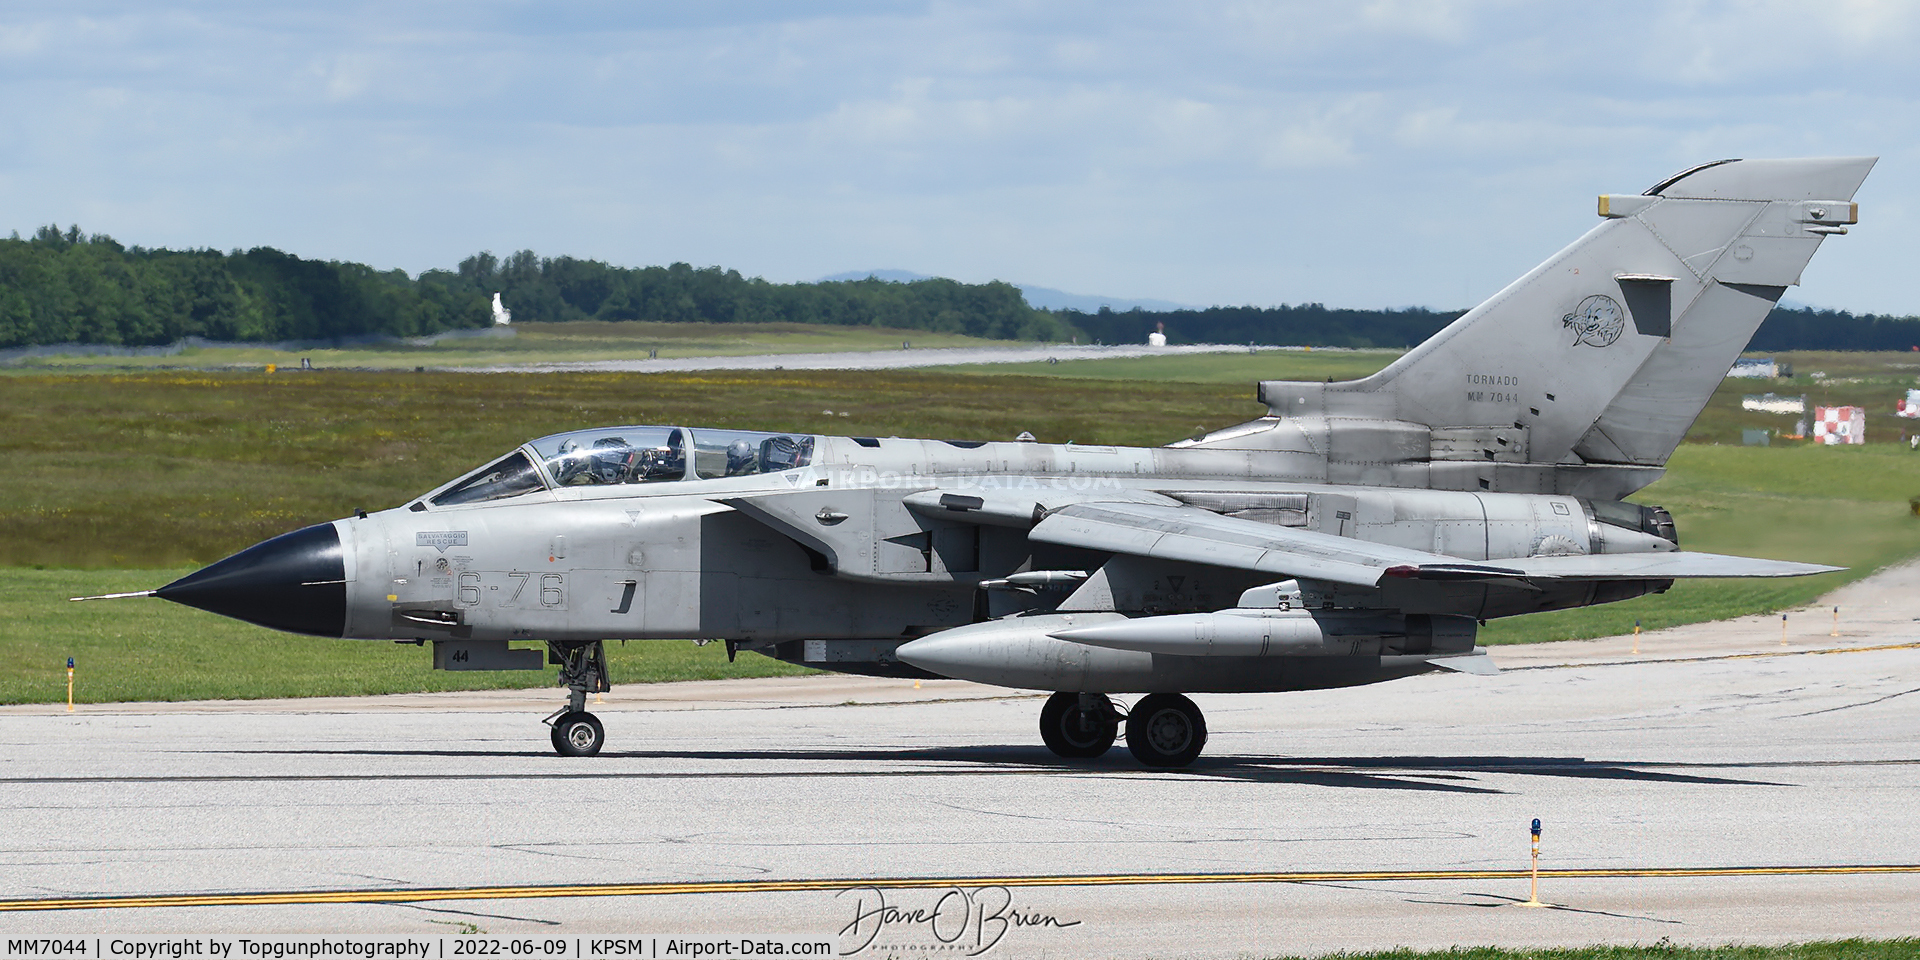 MM7044, Panavia Tornado IDS MLU C/N 375/IS043/5053, Tornado Wingman turns to keep any objects being blown up his intakes while holding short.